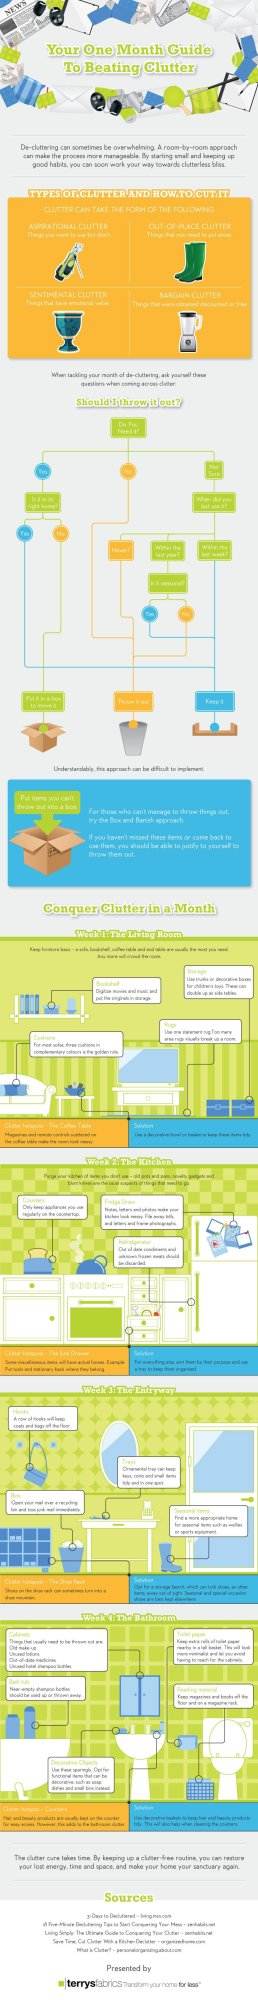 Decluttering Your Home In 4 Weeks Air Conditioner